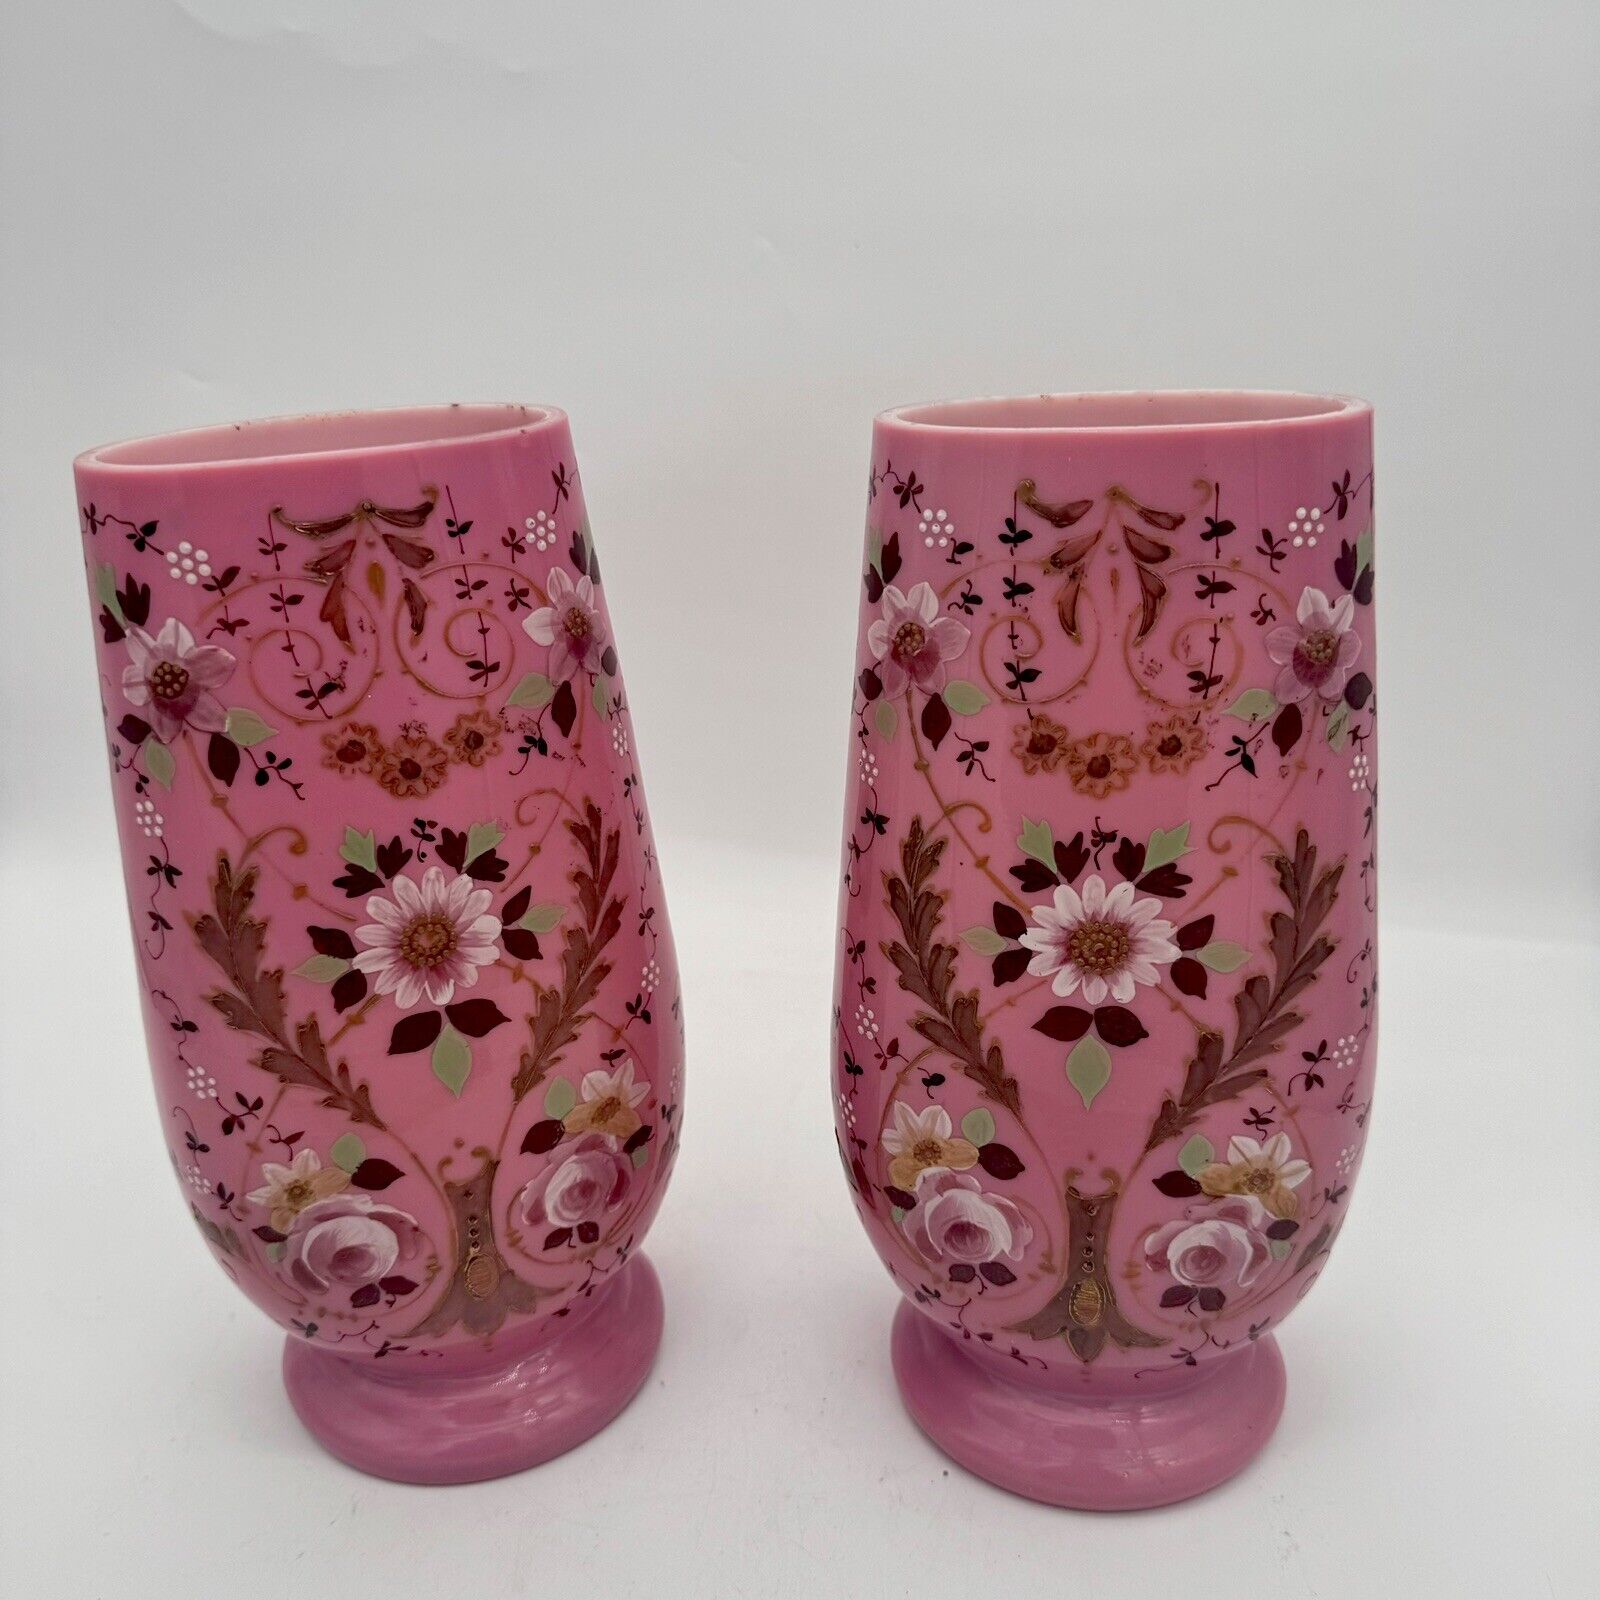 19C Opaline Pink Bristol Glass 2 Vases Enameled With Leaves Flowers 11.5” Rare